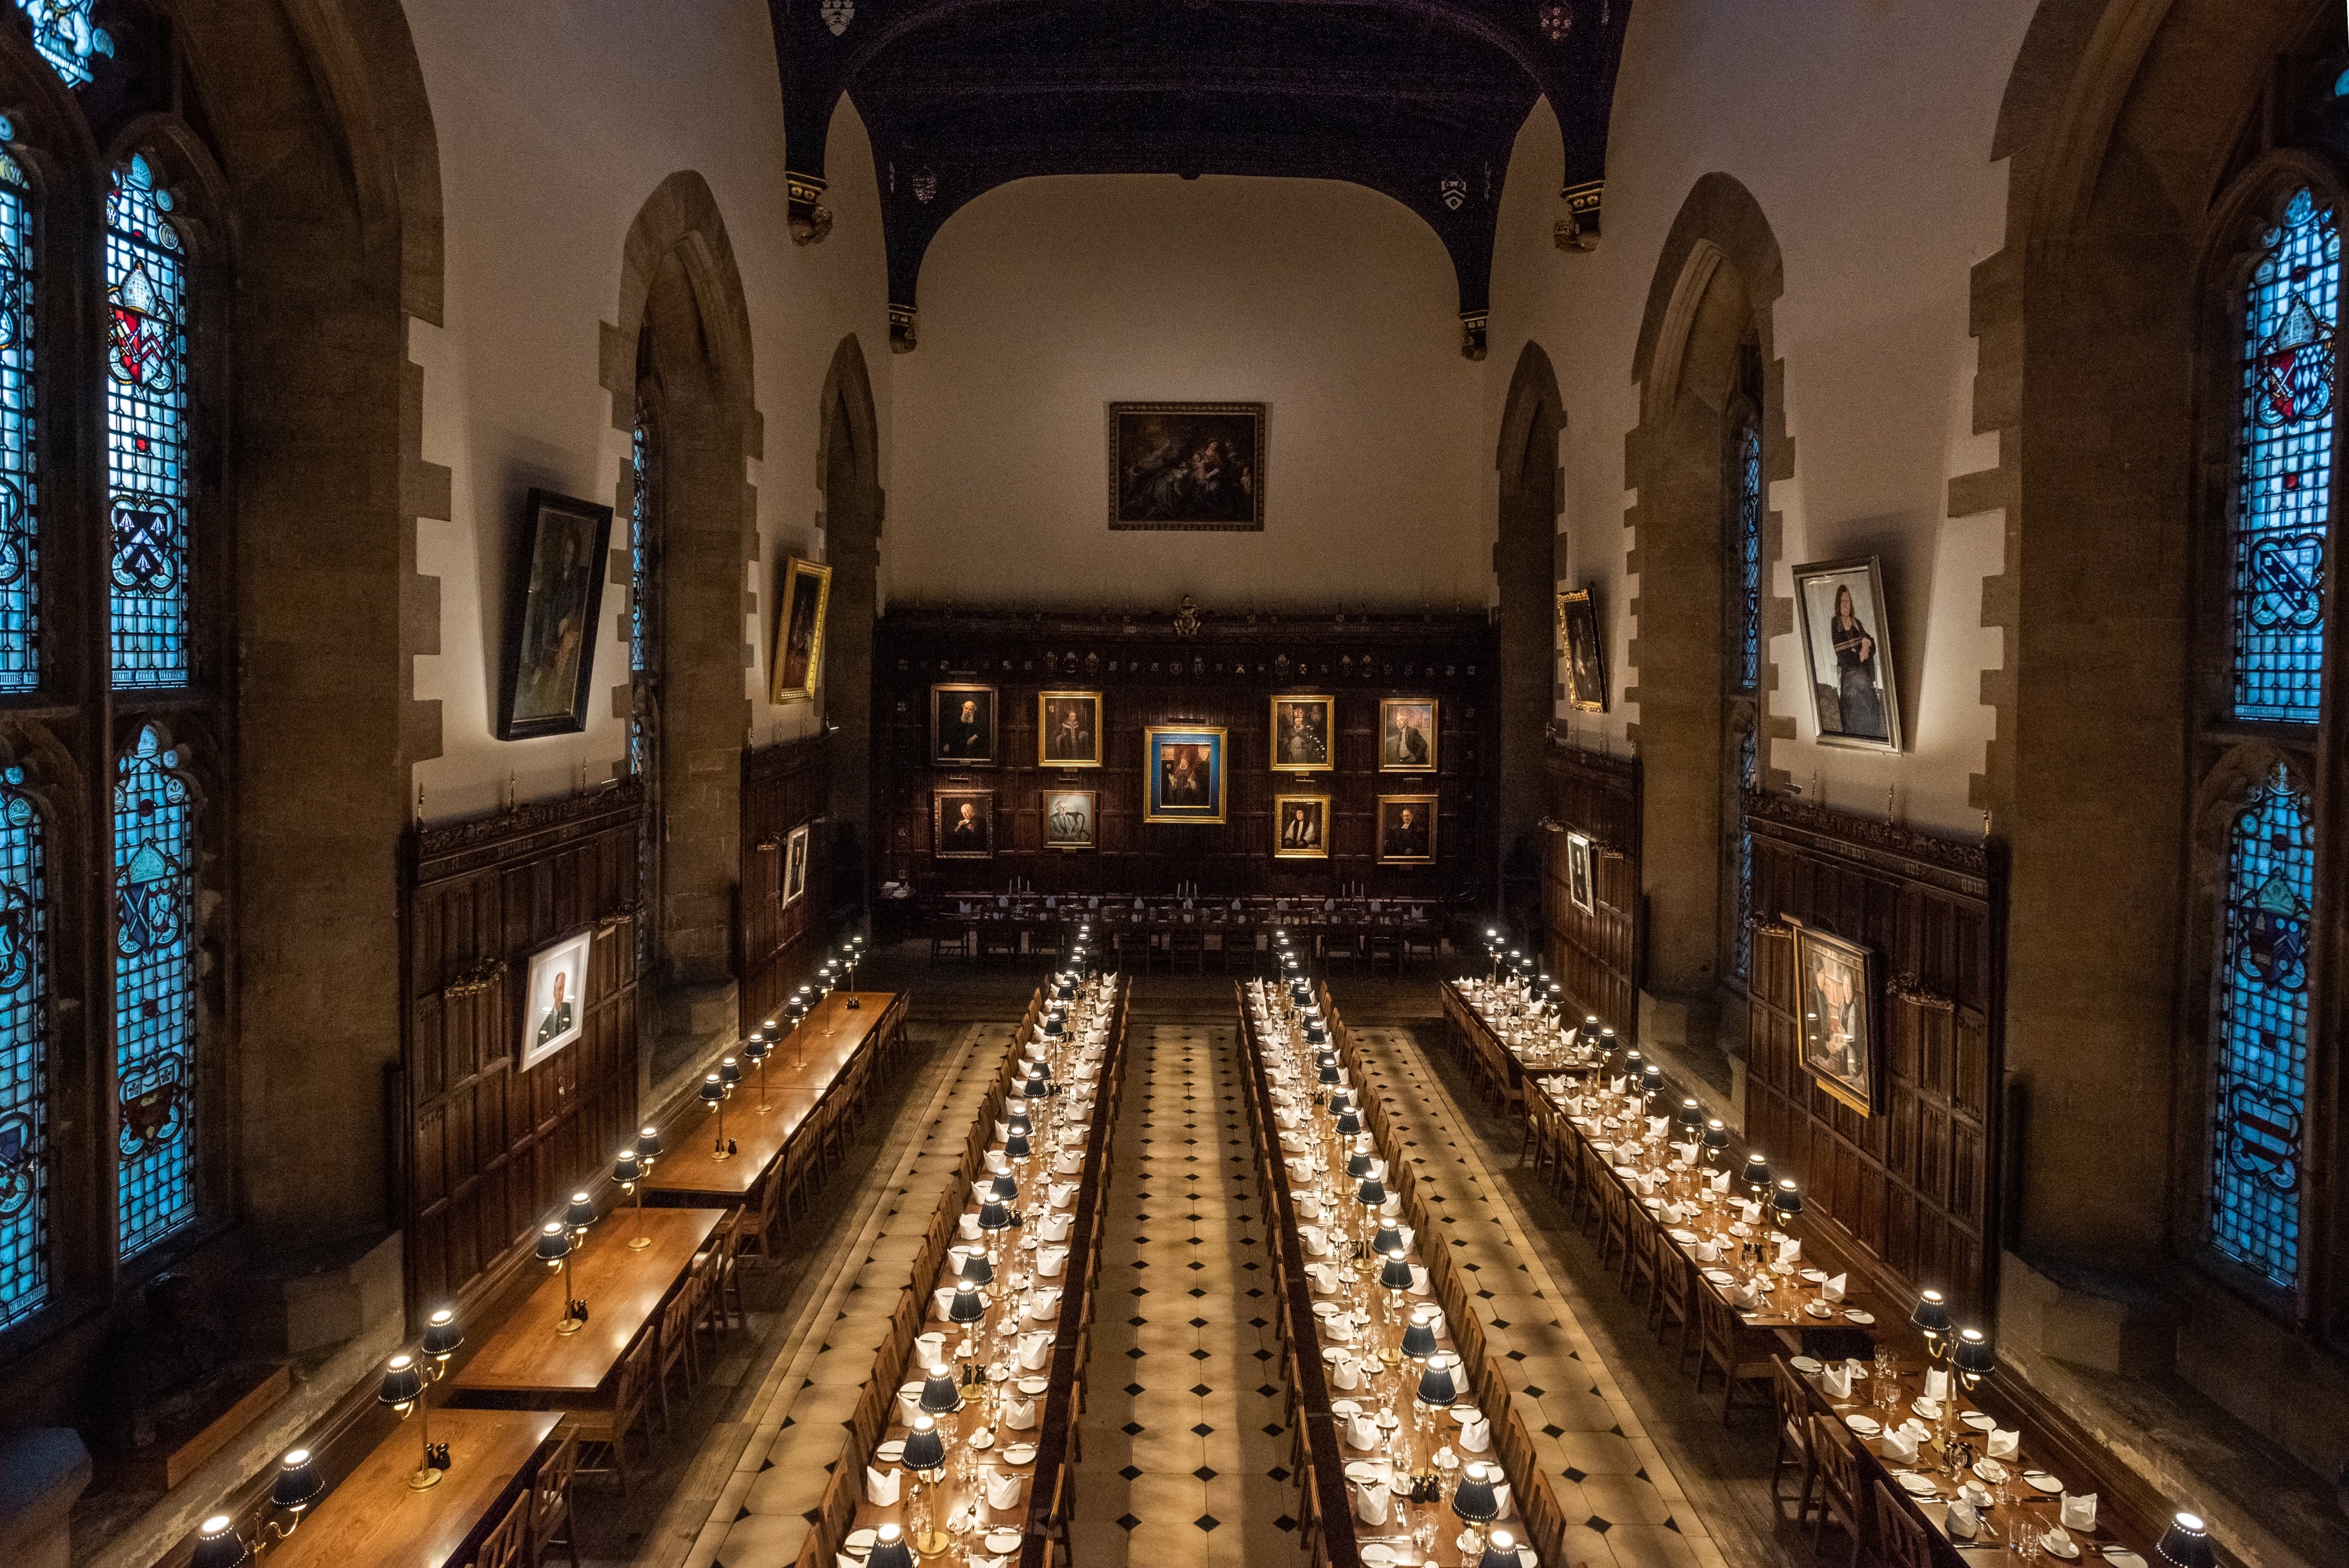 Medieval Dining Hall laid up for a conference dinner